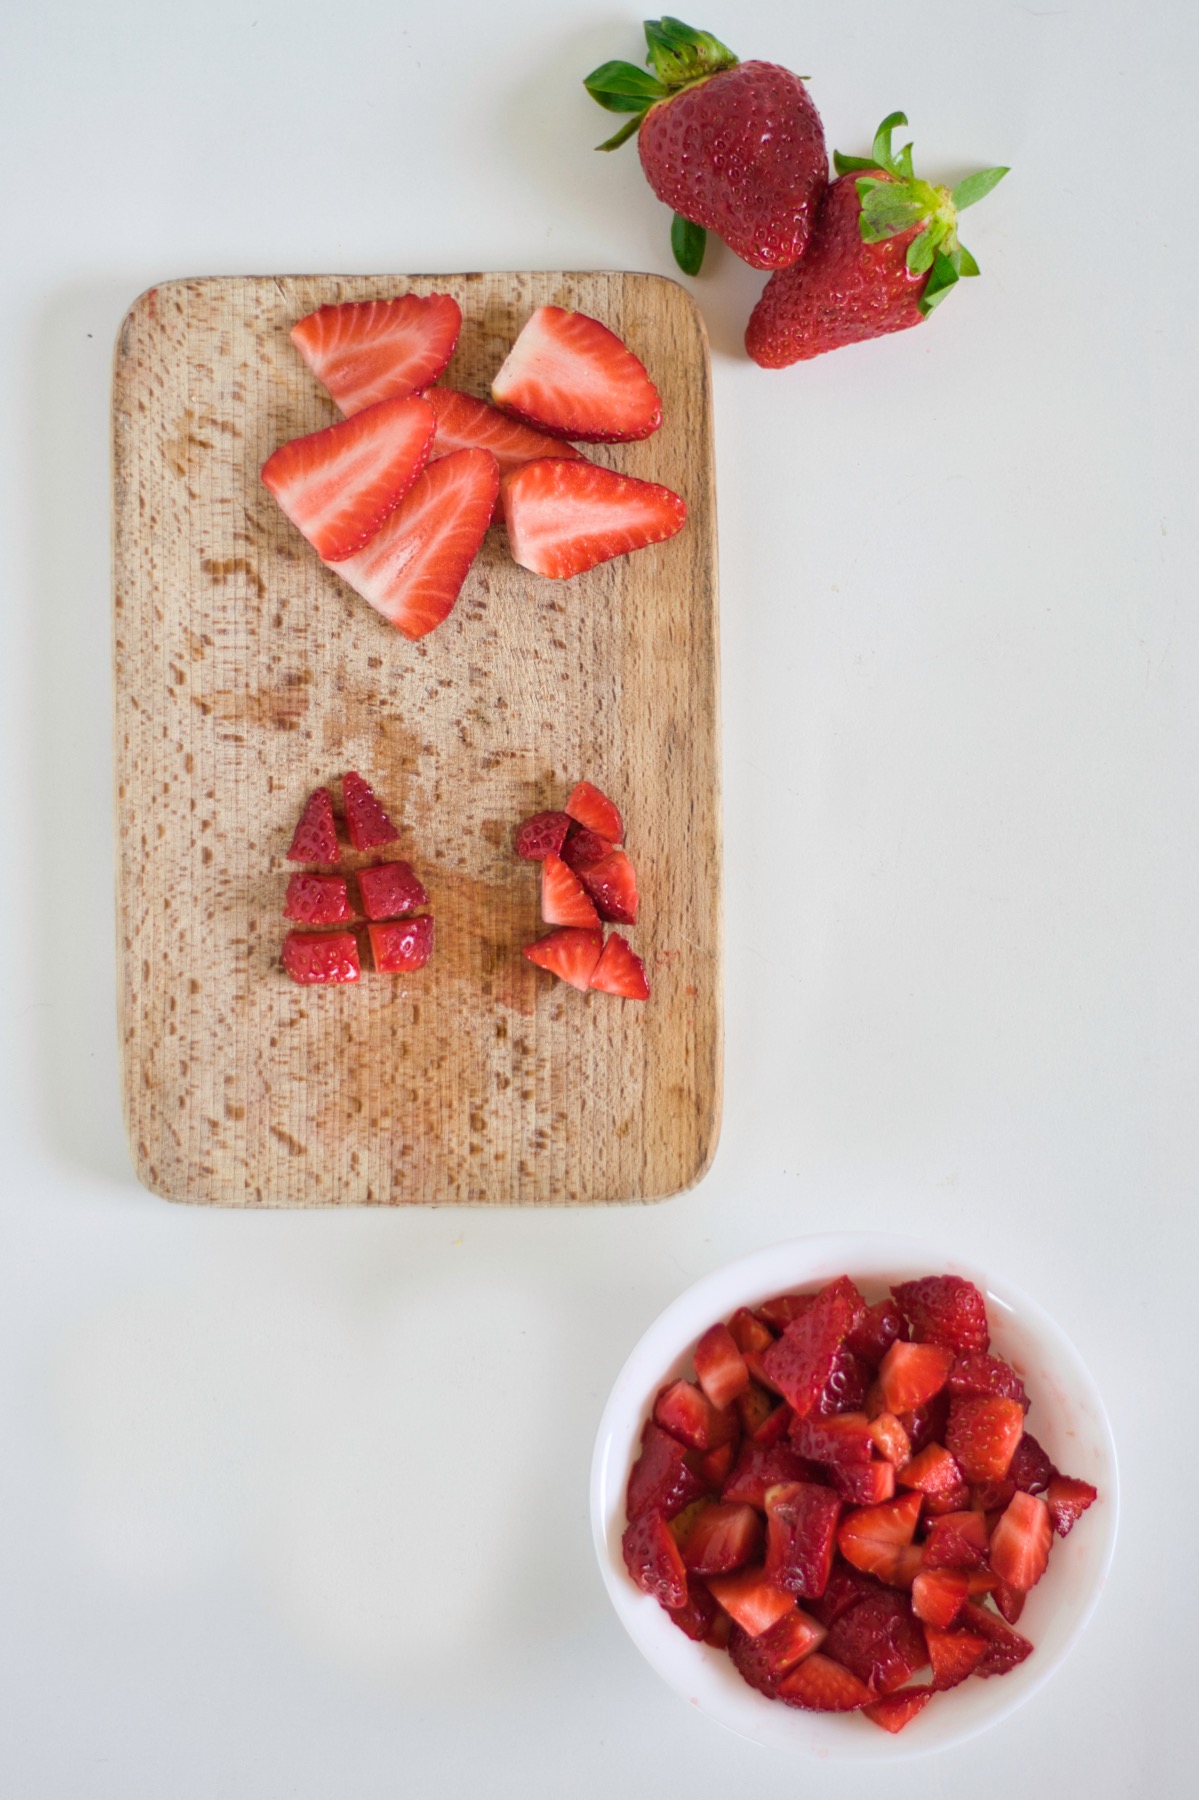 chop strawberries into chunks to make a strawberry crumble